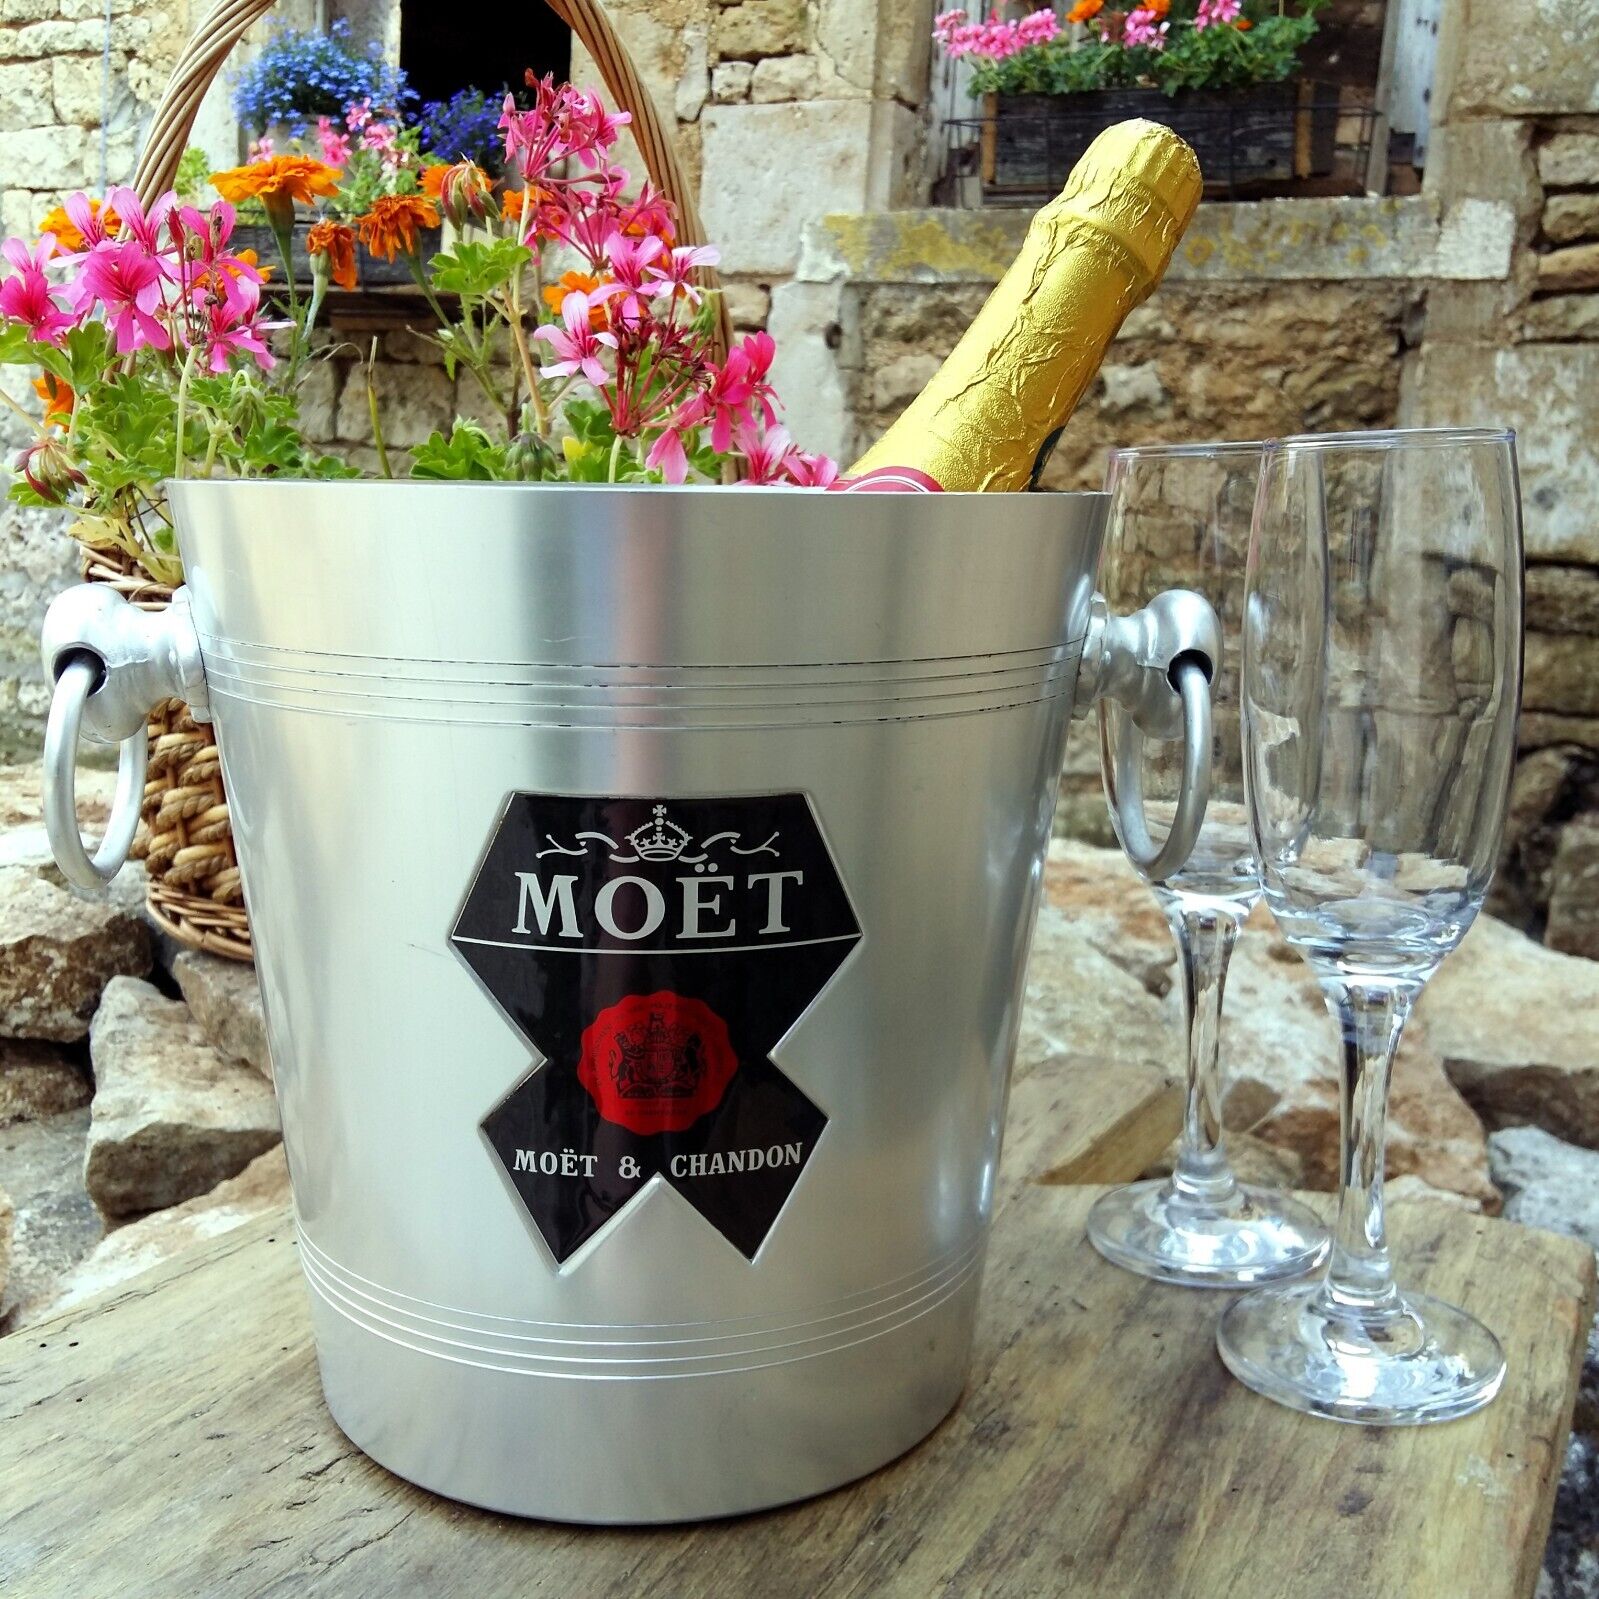 Vintage Moet & Chandon Champagne Metal Ice Bucket with Ringed Handles